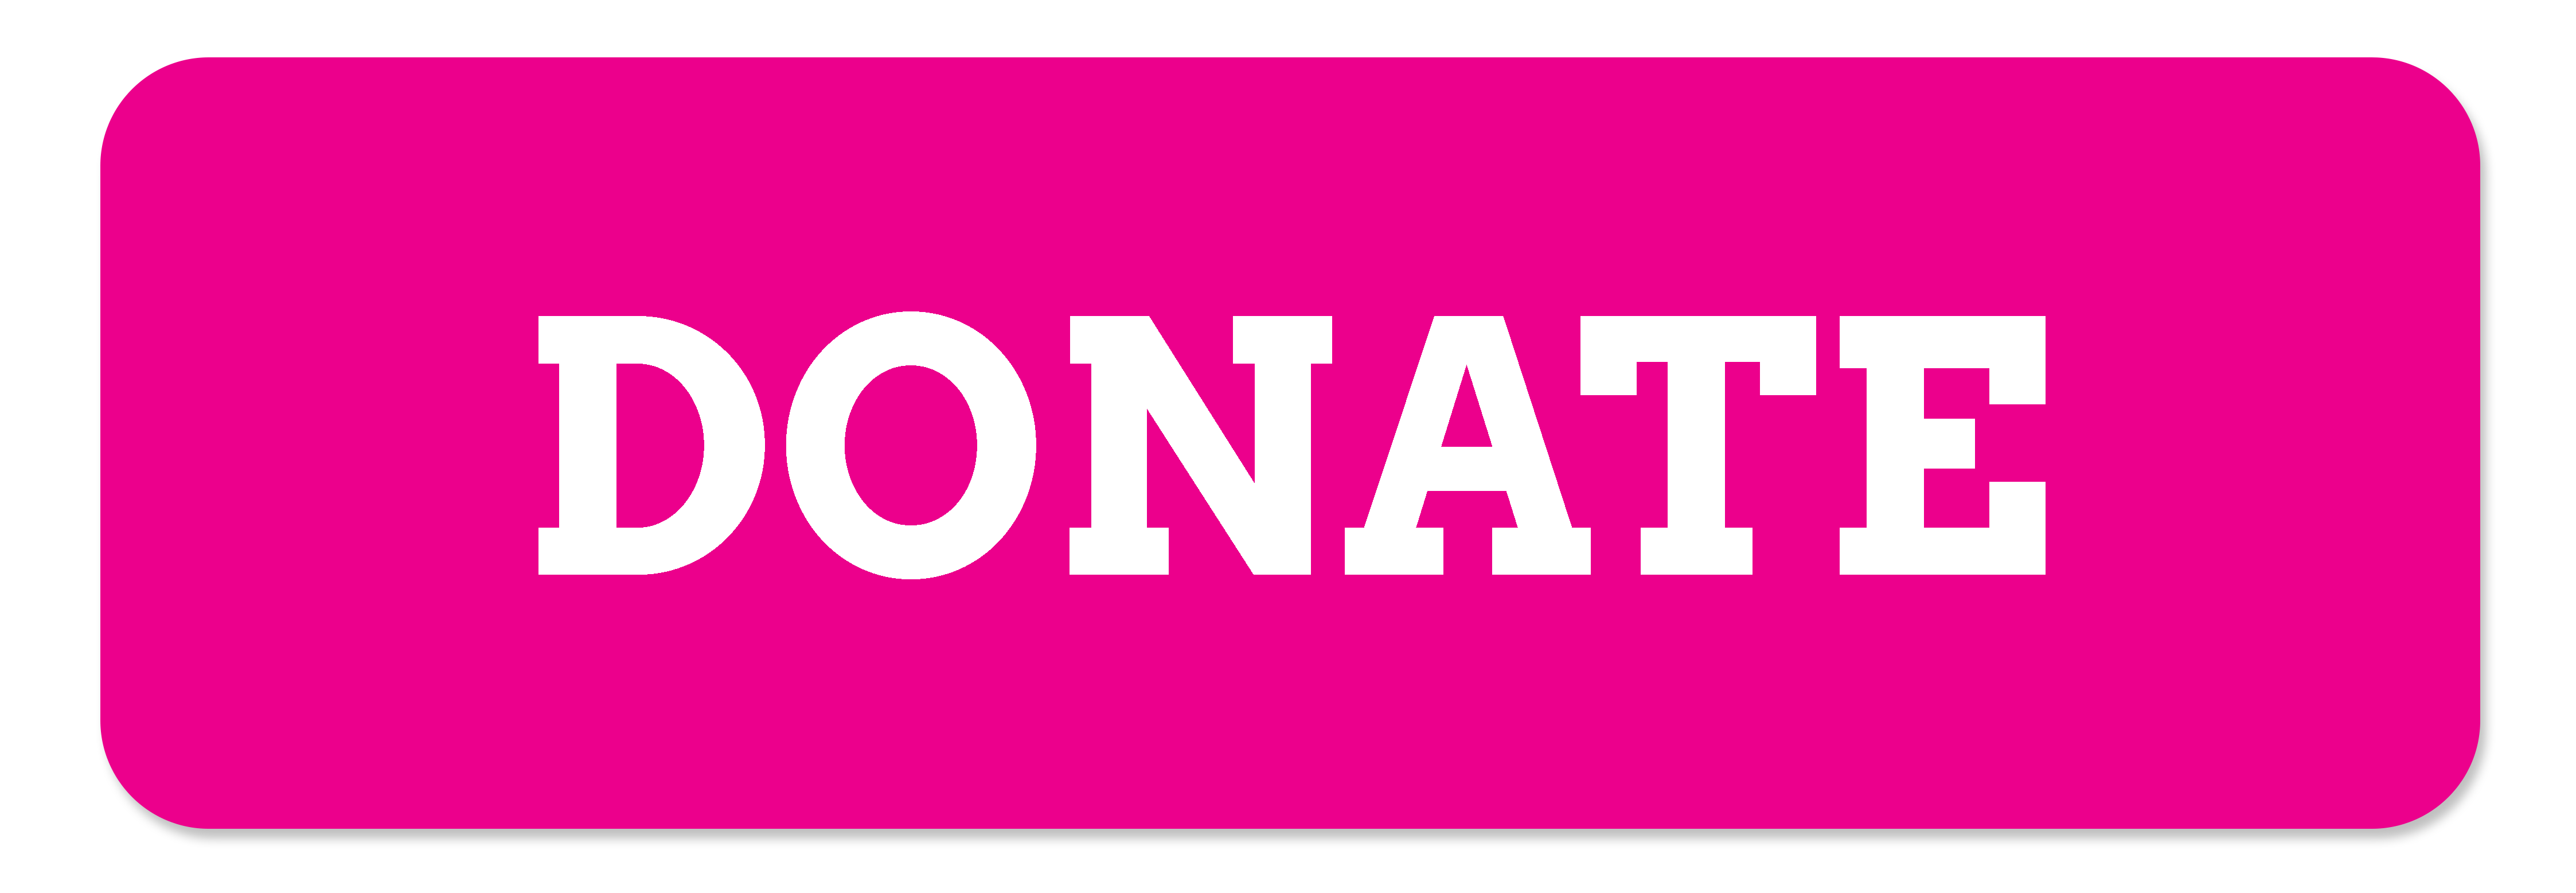 Donate Button pink